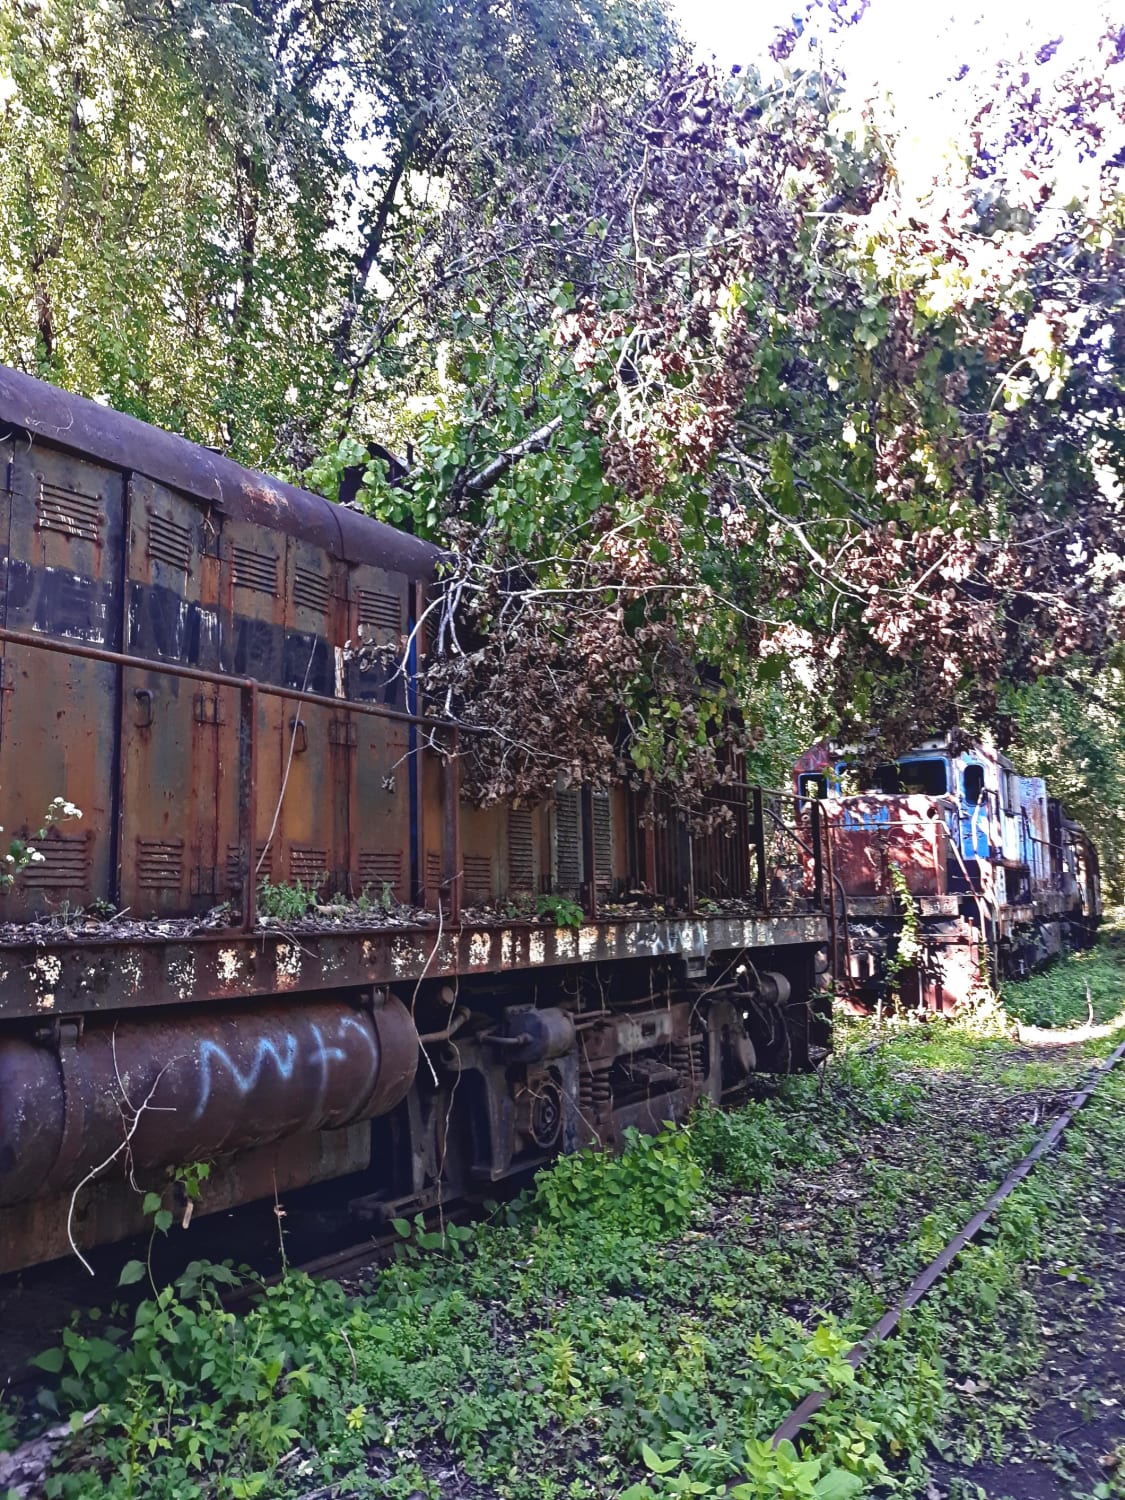 Abandoned train cars in the woods Upstate NY